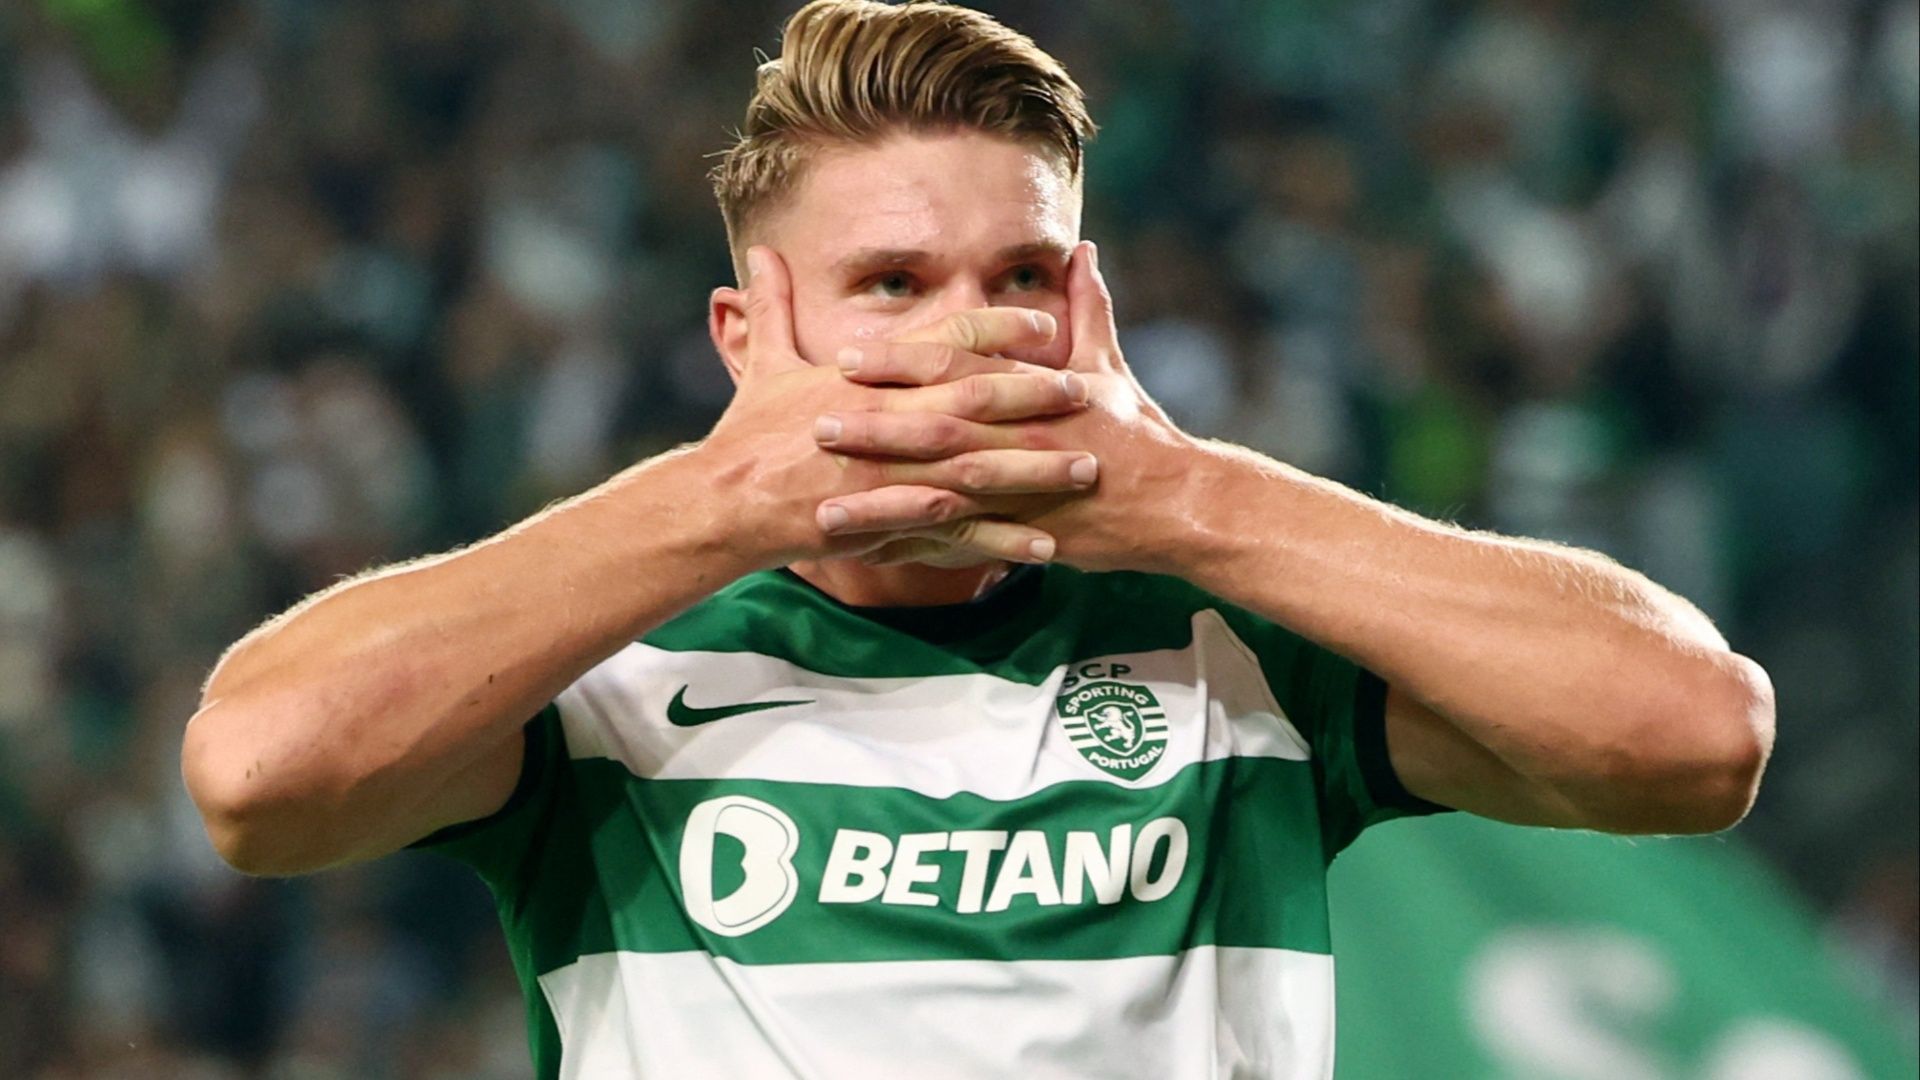  Viktor Gyokeres, a Swedish professional footballer who plays as a striker for English Championship club Coventry City, on loan from Brighton & Hove Albion, and the Sweden national team, celebrates a goal during a match for Sporting Lisbon.